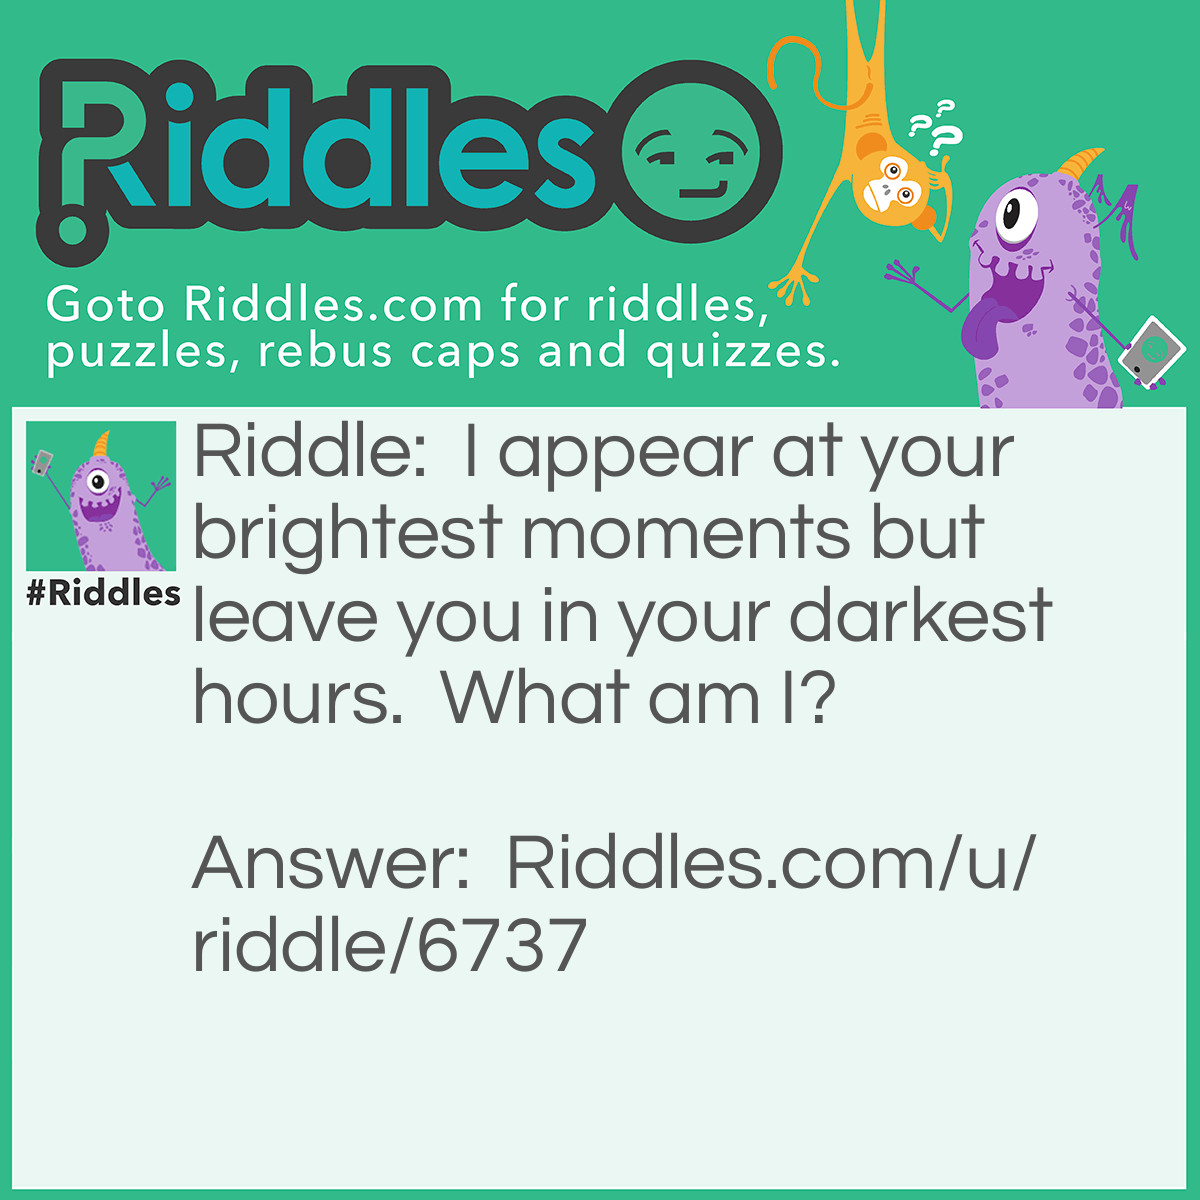 Riddle: I appear at your brightest moments but leave you in your darkest hours.  What am I? Answer: Your shadow.